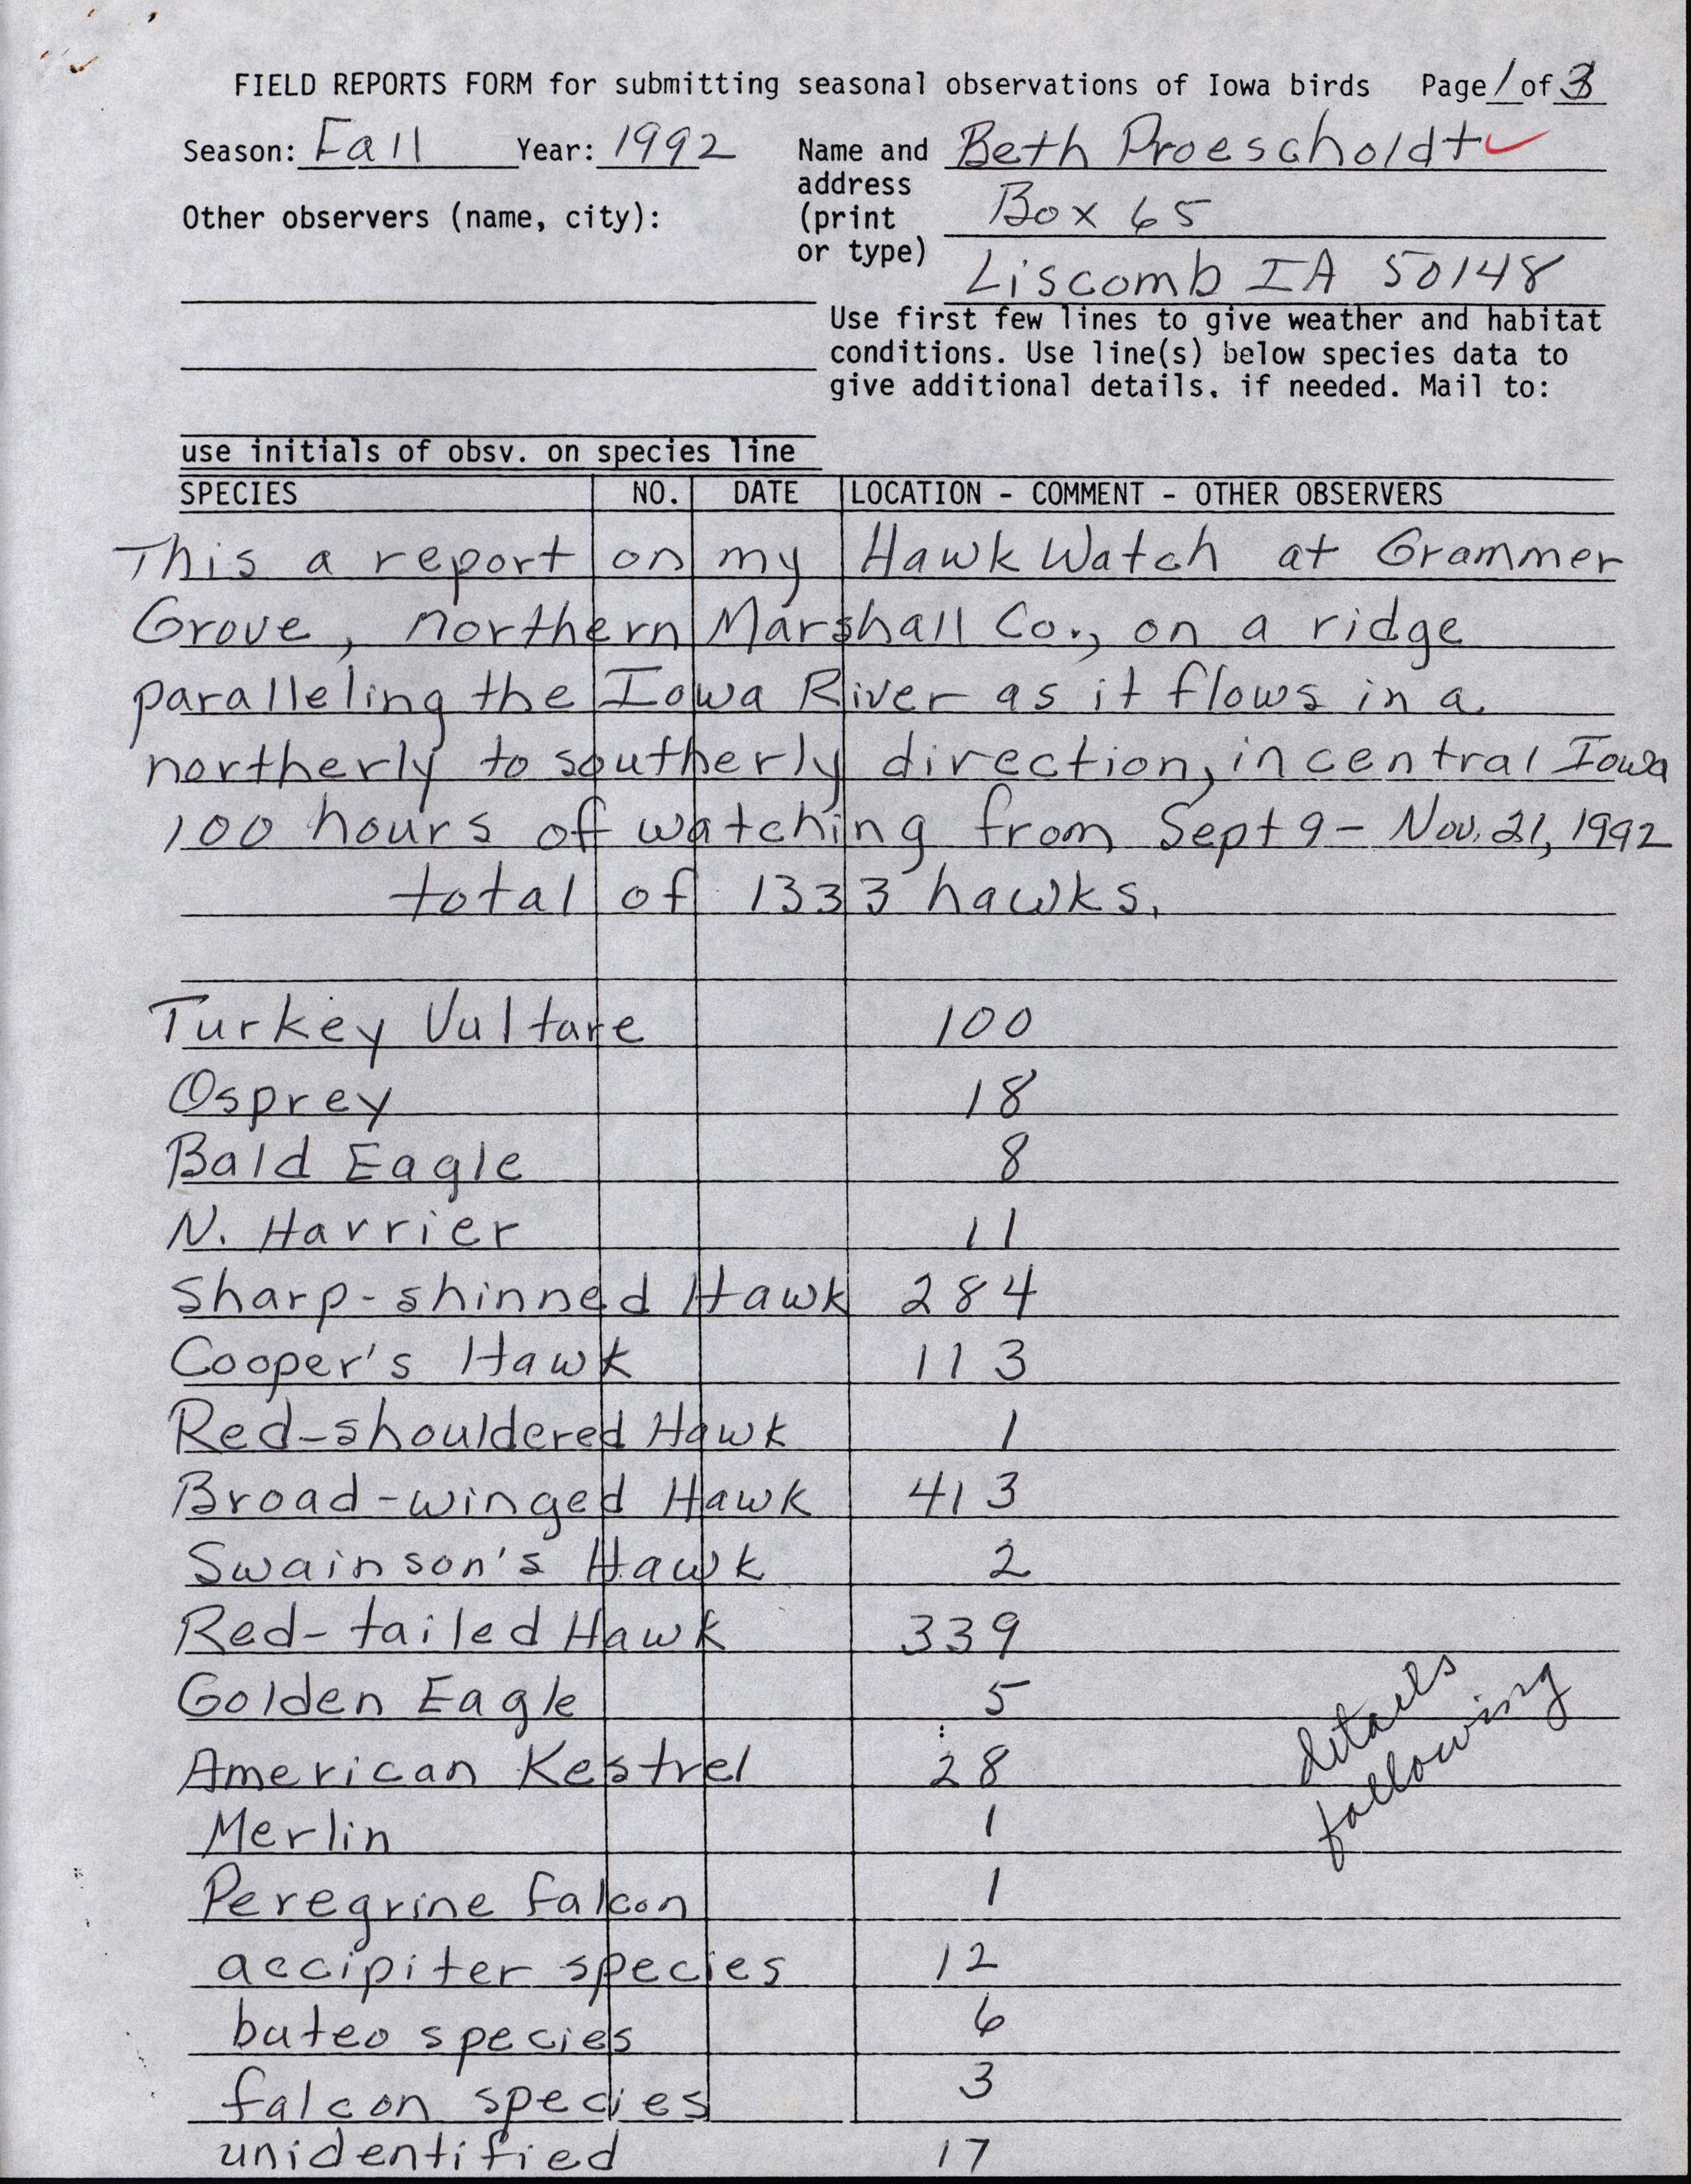 Field reports form for submitting seasonal observations of Iowa birds, Beth Proescholdt, fall 1992